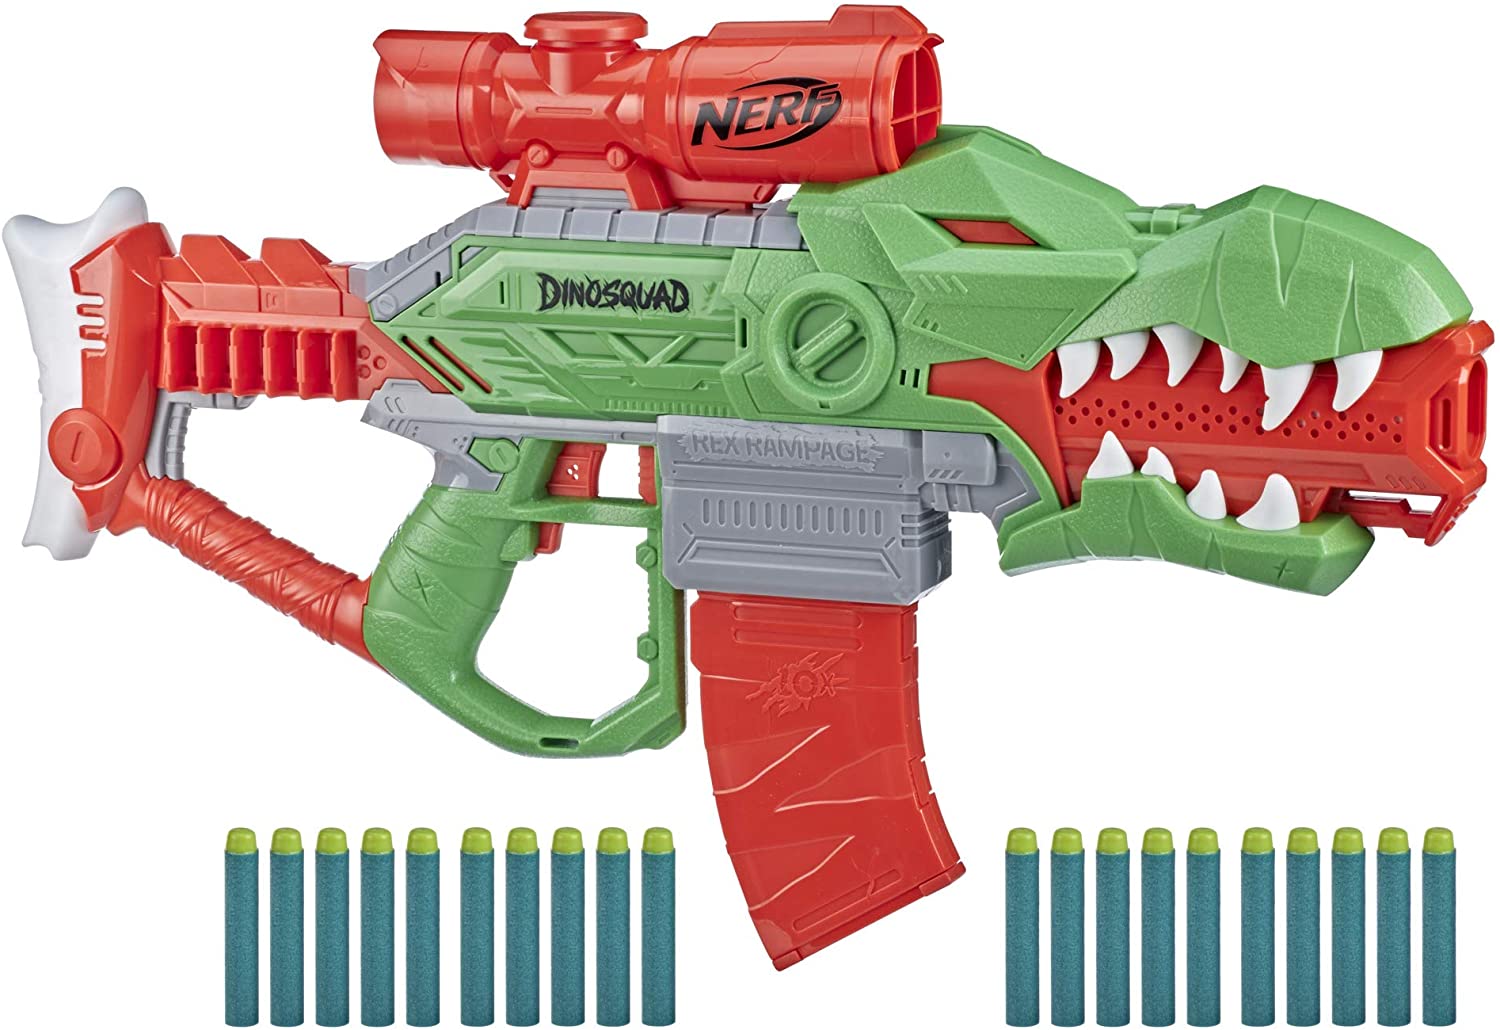 HASBRO Nerf Rex Rampage Dino Squad: Blast into battle with the power of a T-rex with this blaster that features awesome dinosaur details - F0808